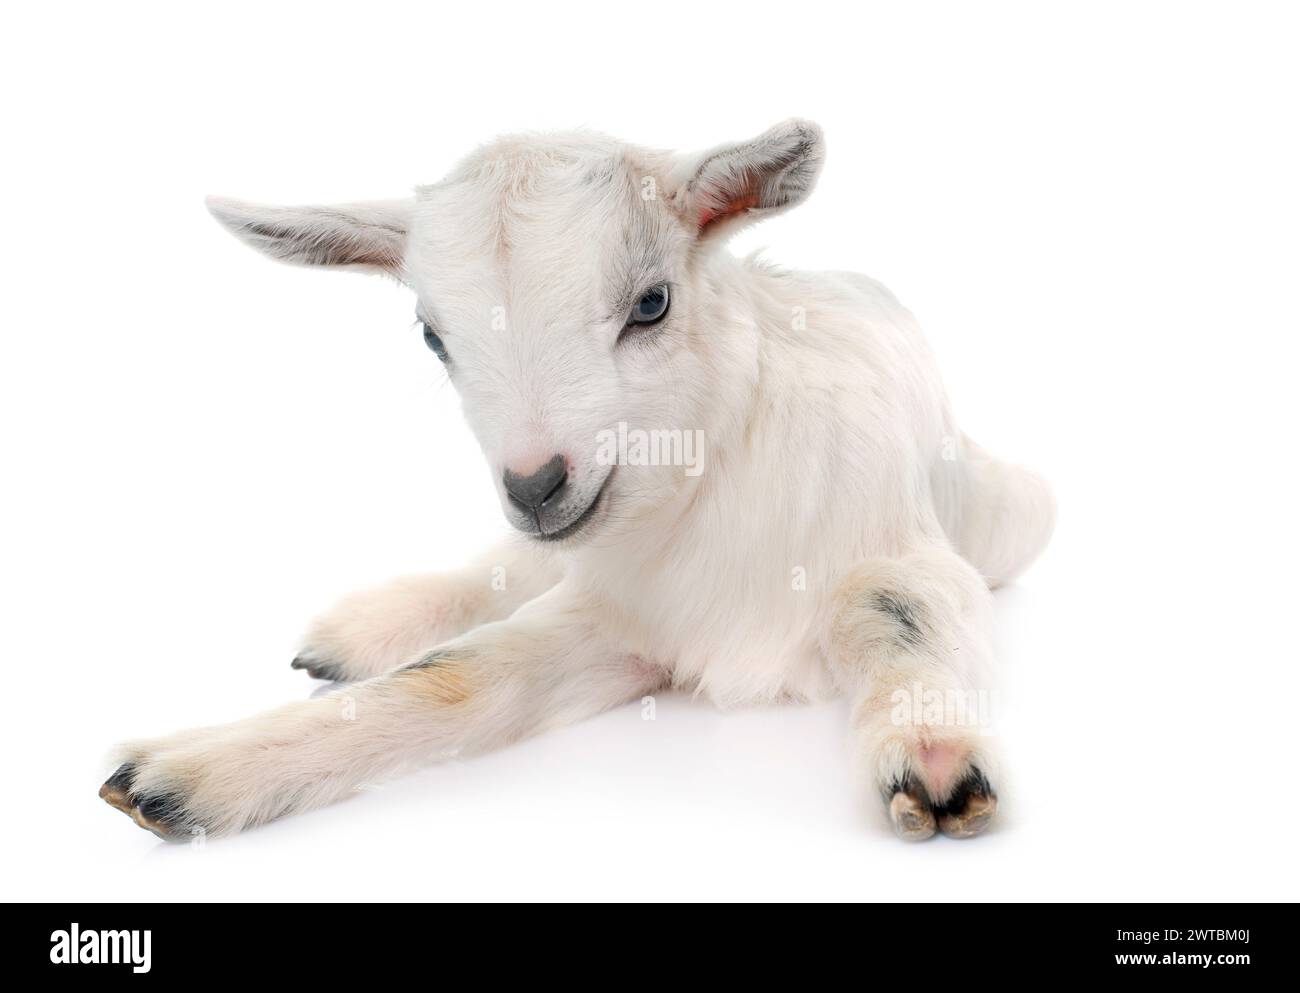 baby goat in front of white background Stock Photo